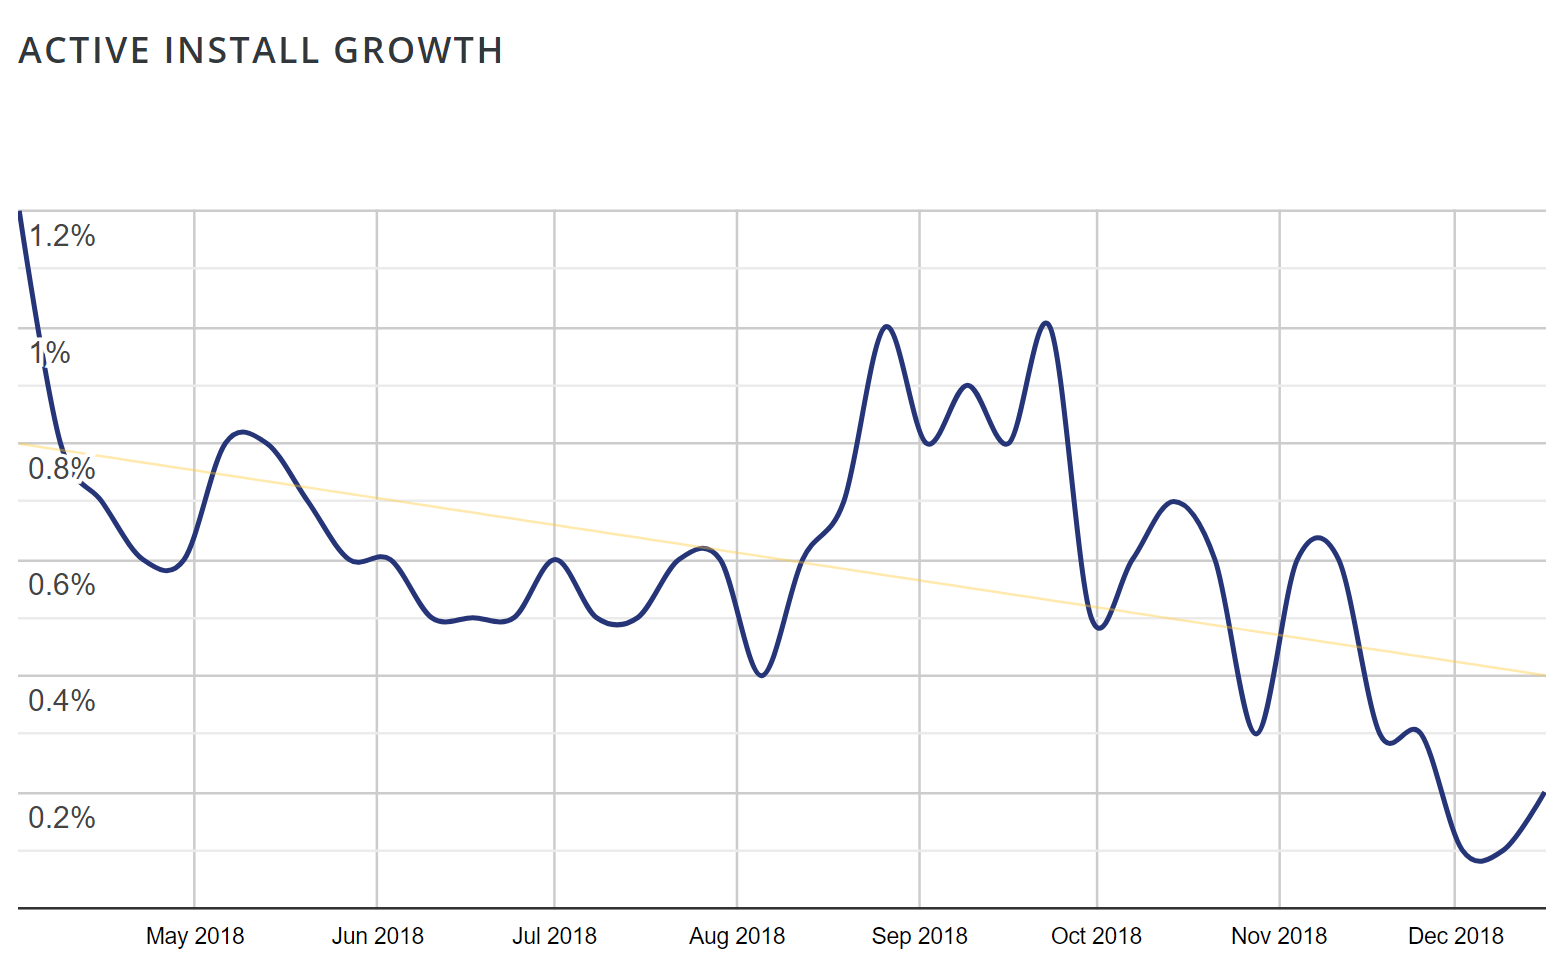 Active Install Growth under each plugin’s Advanced View page on the repository